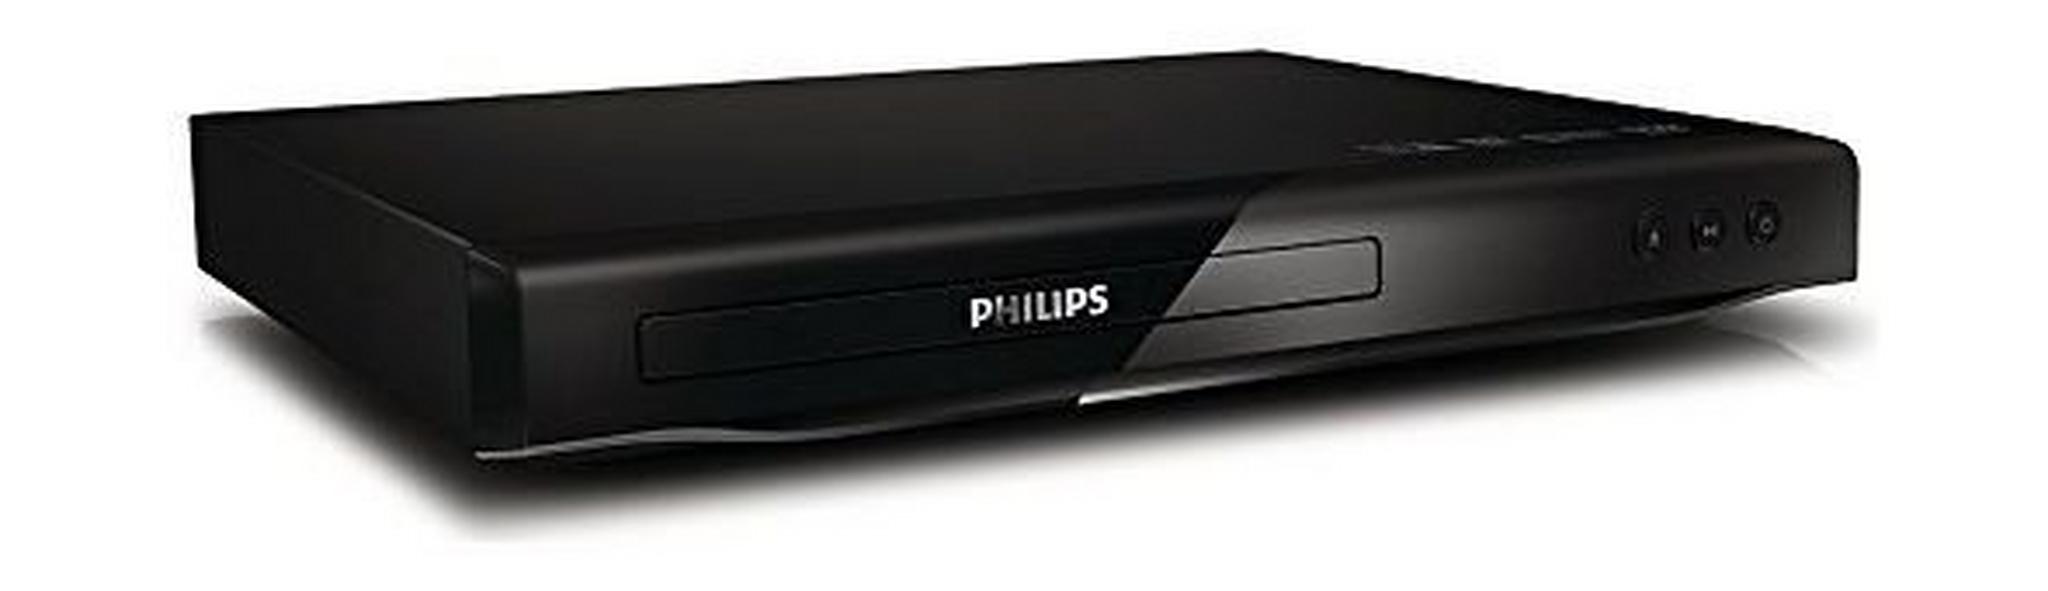 Philips DVP2880 DVD Player With HDMI